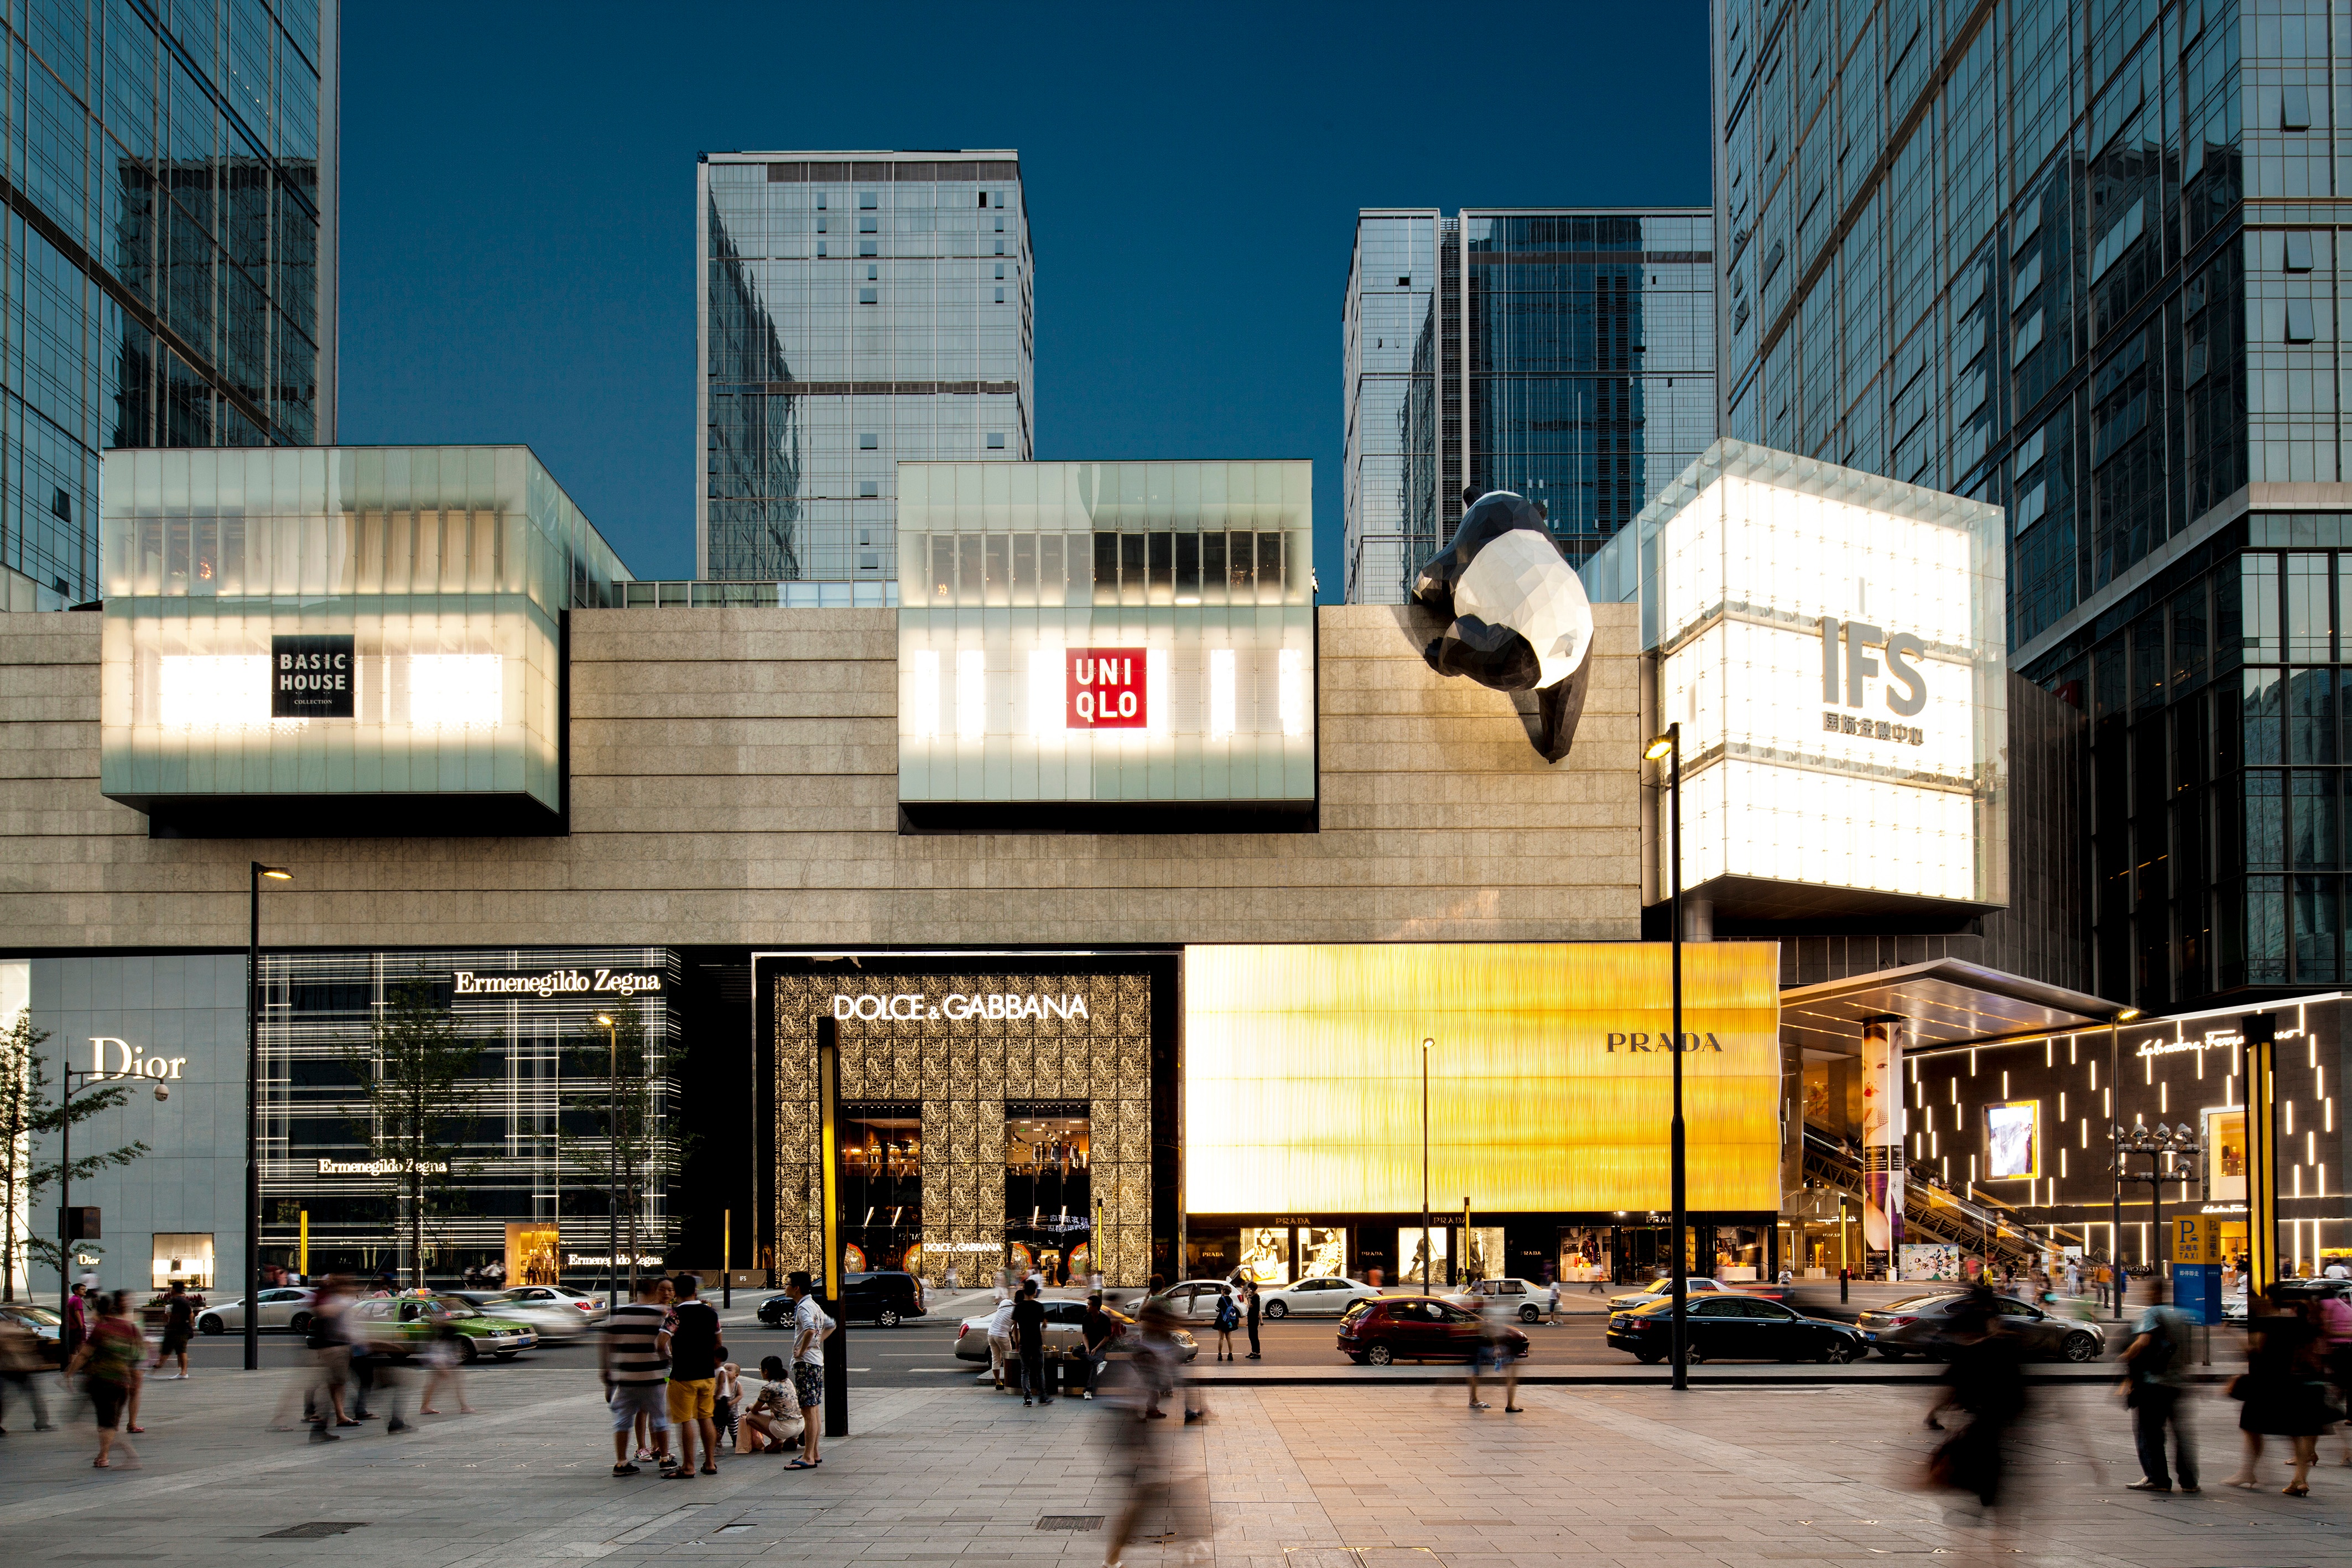 Chengdu IFS opened in 2014 and is now the top luxury shopping destination in the city, as well as one of the most influential premium malls in China’s Midwest region. Courtesy photo